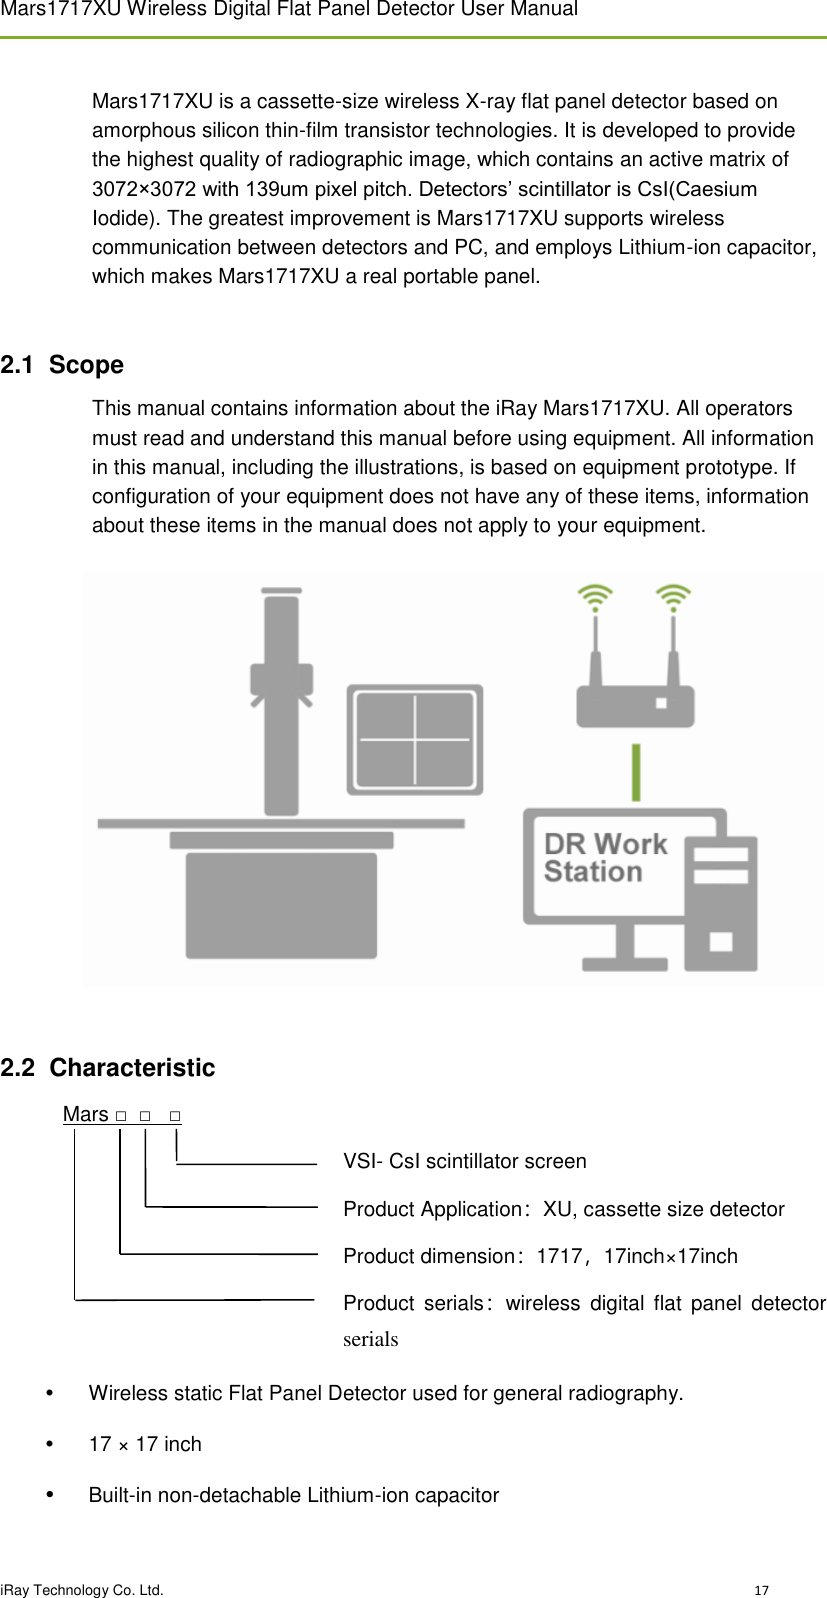 Mars1717XU Wireless Digital Flat Panel Detector User Manual  iRay Technology Co. Ltd.                                                                                                                                                                                   17                                                                                                                                                                                  Mars1717XU is a cassette-size wireless X-ray flat panel detector based on amorphous silicon thin-film transistor technologies. It is developed to provide the highest quality of radiographic image, which contains an active matrix of 3072×3072 with 139um pixel pitch. Detectors’ scintillator is CsI(Caesium Iodide). The greatest improvement is Mars1717XU supports wireless communication between detectors and PC, and employs Lithium-ion capacitor, which makes Mars1717XU a real portable panel.   2.1  Scope This manual contains information about the iRay Mars1717XU. All operators must read and understand this manual before using equipment. All information in this manual, including the illustrations, is based on equipment prototype. If configuration of your equipment does not have any of these items, information about these items in the manual does not apply to your equipment.              2.2  Characteristic Mars □  □   □ VSI- CsI scintillator screen Product Application：XU, cassette size detector Product dimension：1717，17inch×17inch Product  serials：wireless  digital  flat  panel  detector serials   Wireless static Flat Panel Detector used for general radiography.   17 × 17 inch   Built-in non-detachable Lithium-ion capacitor 